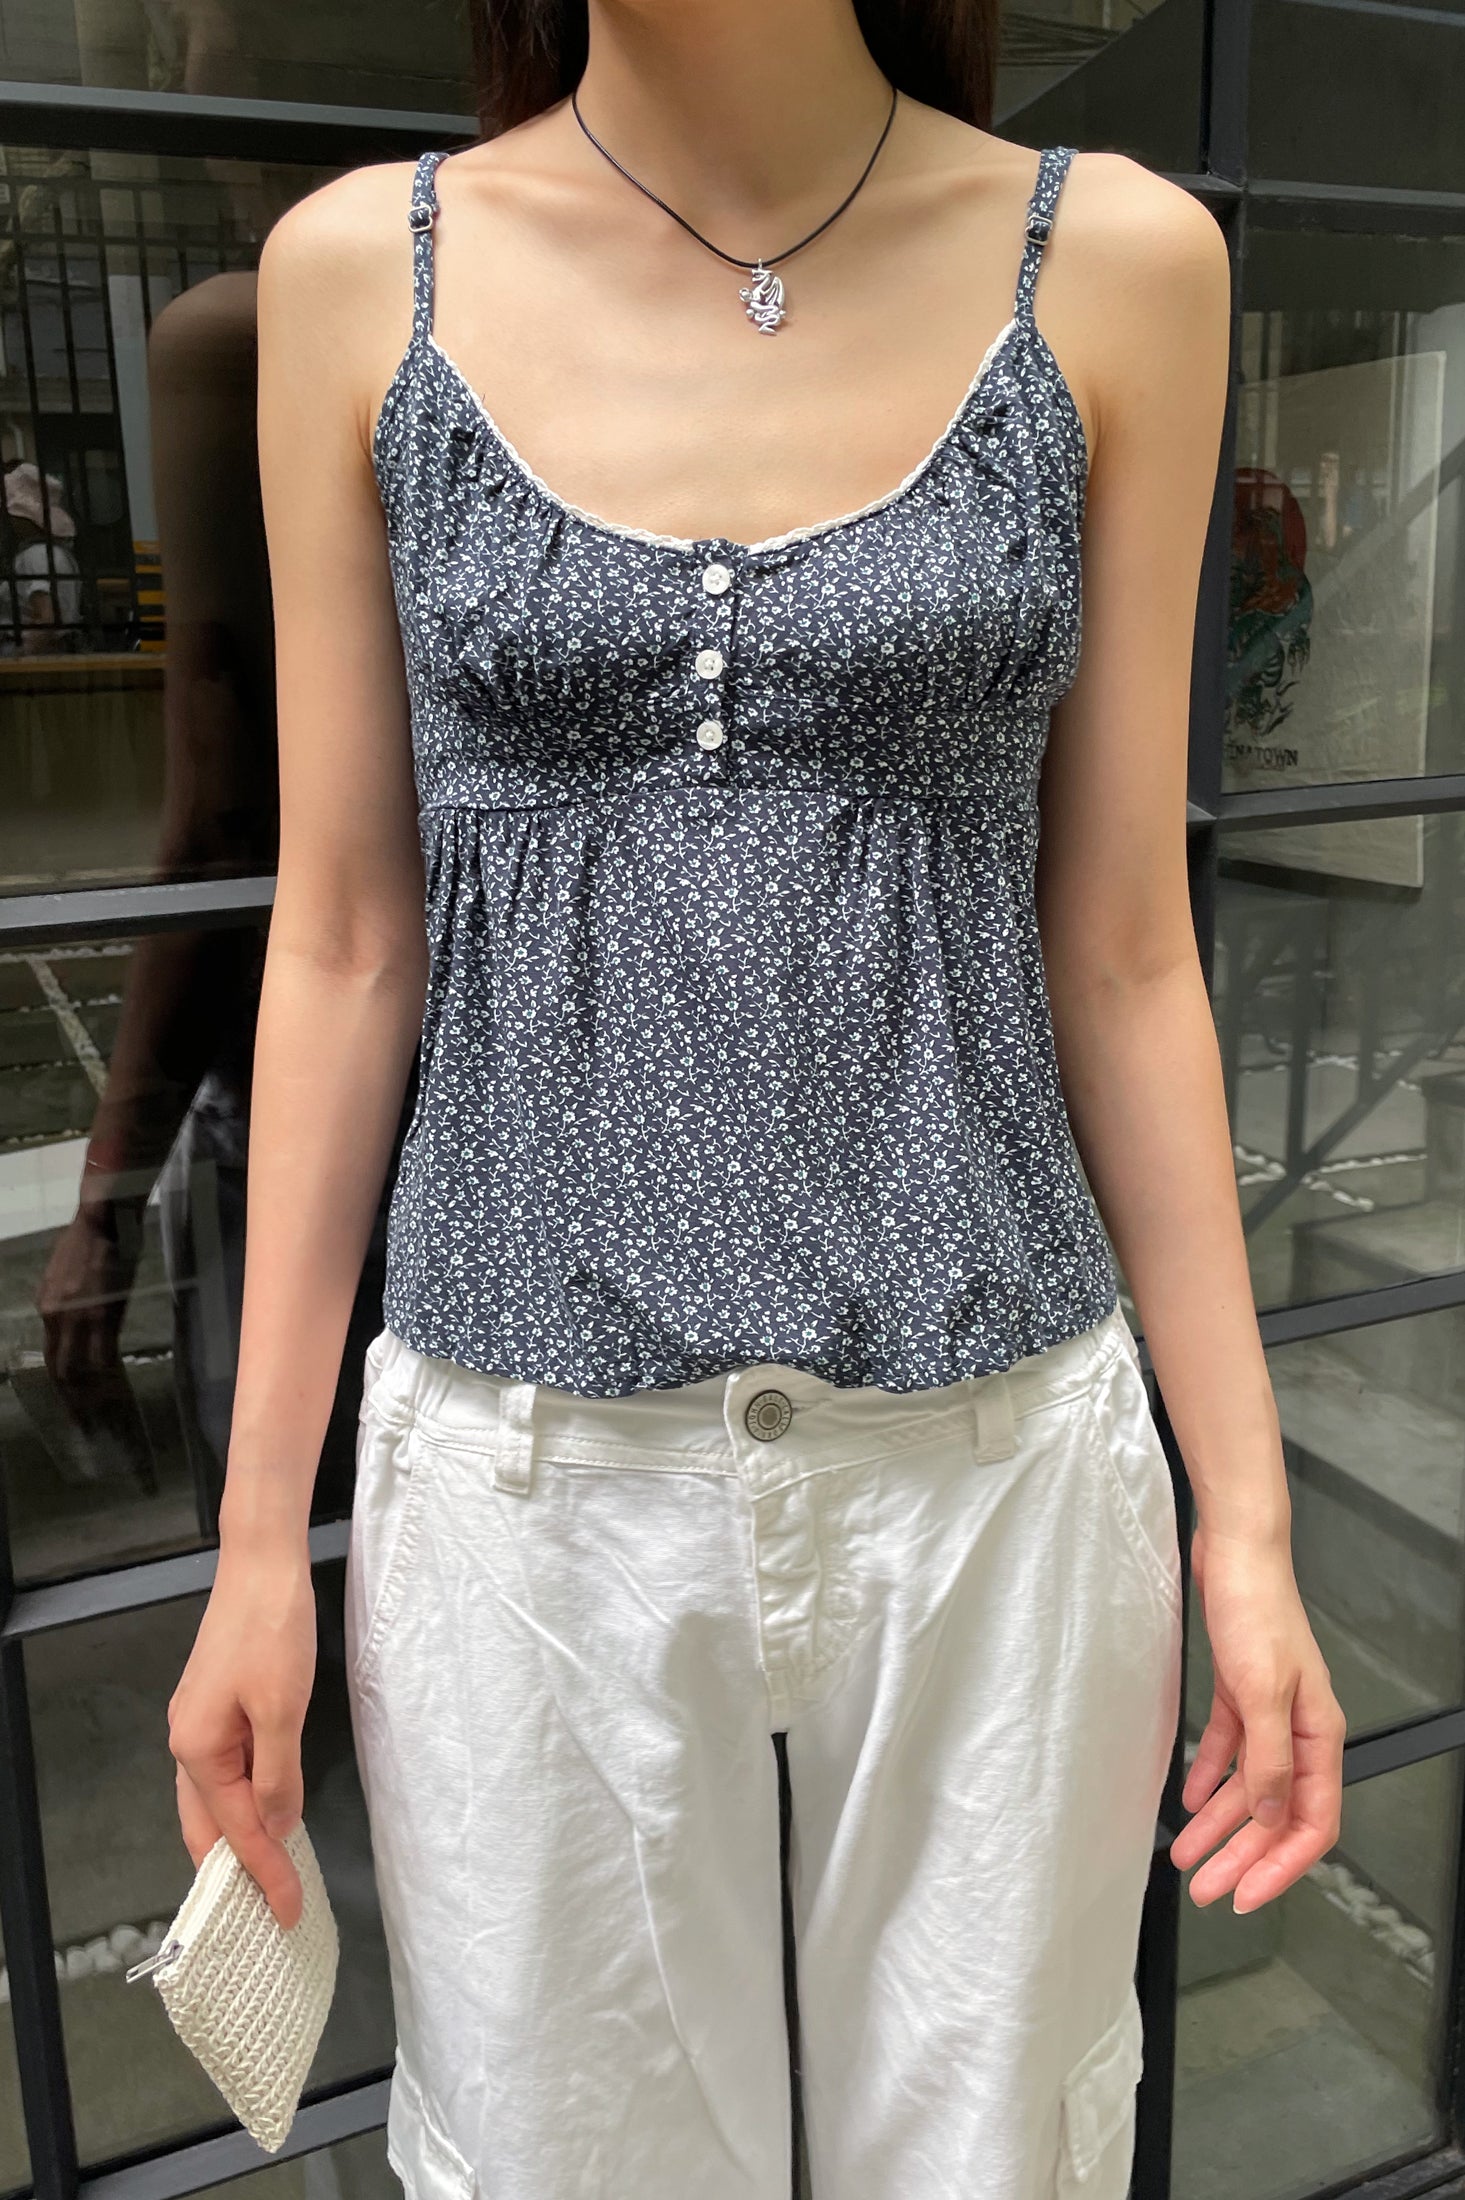 Hi! I'm currently looking for the Brandy Melville Tiffany Button Up tank.  It is so cute but I can not find the exact design for sale anywhere! Some  photos for reference: 